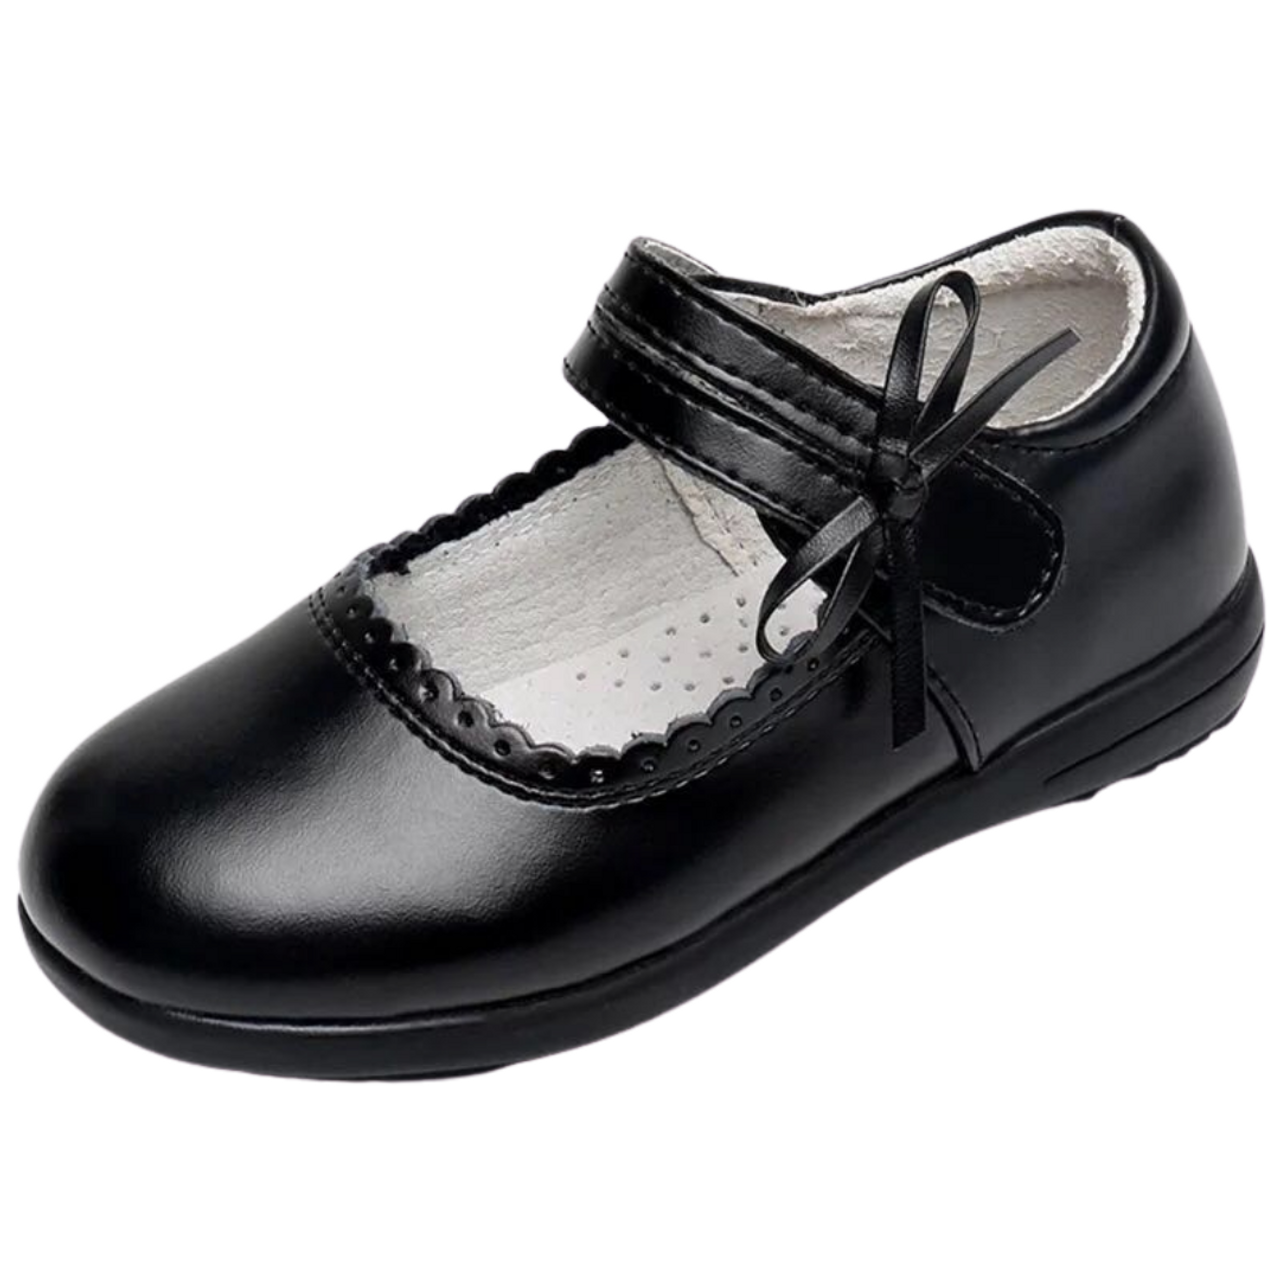 Montecatini MT5115 5 Eyelet Oxford Leather Patent Cuban Heel Shoes